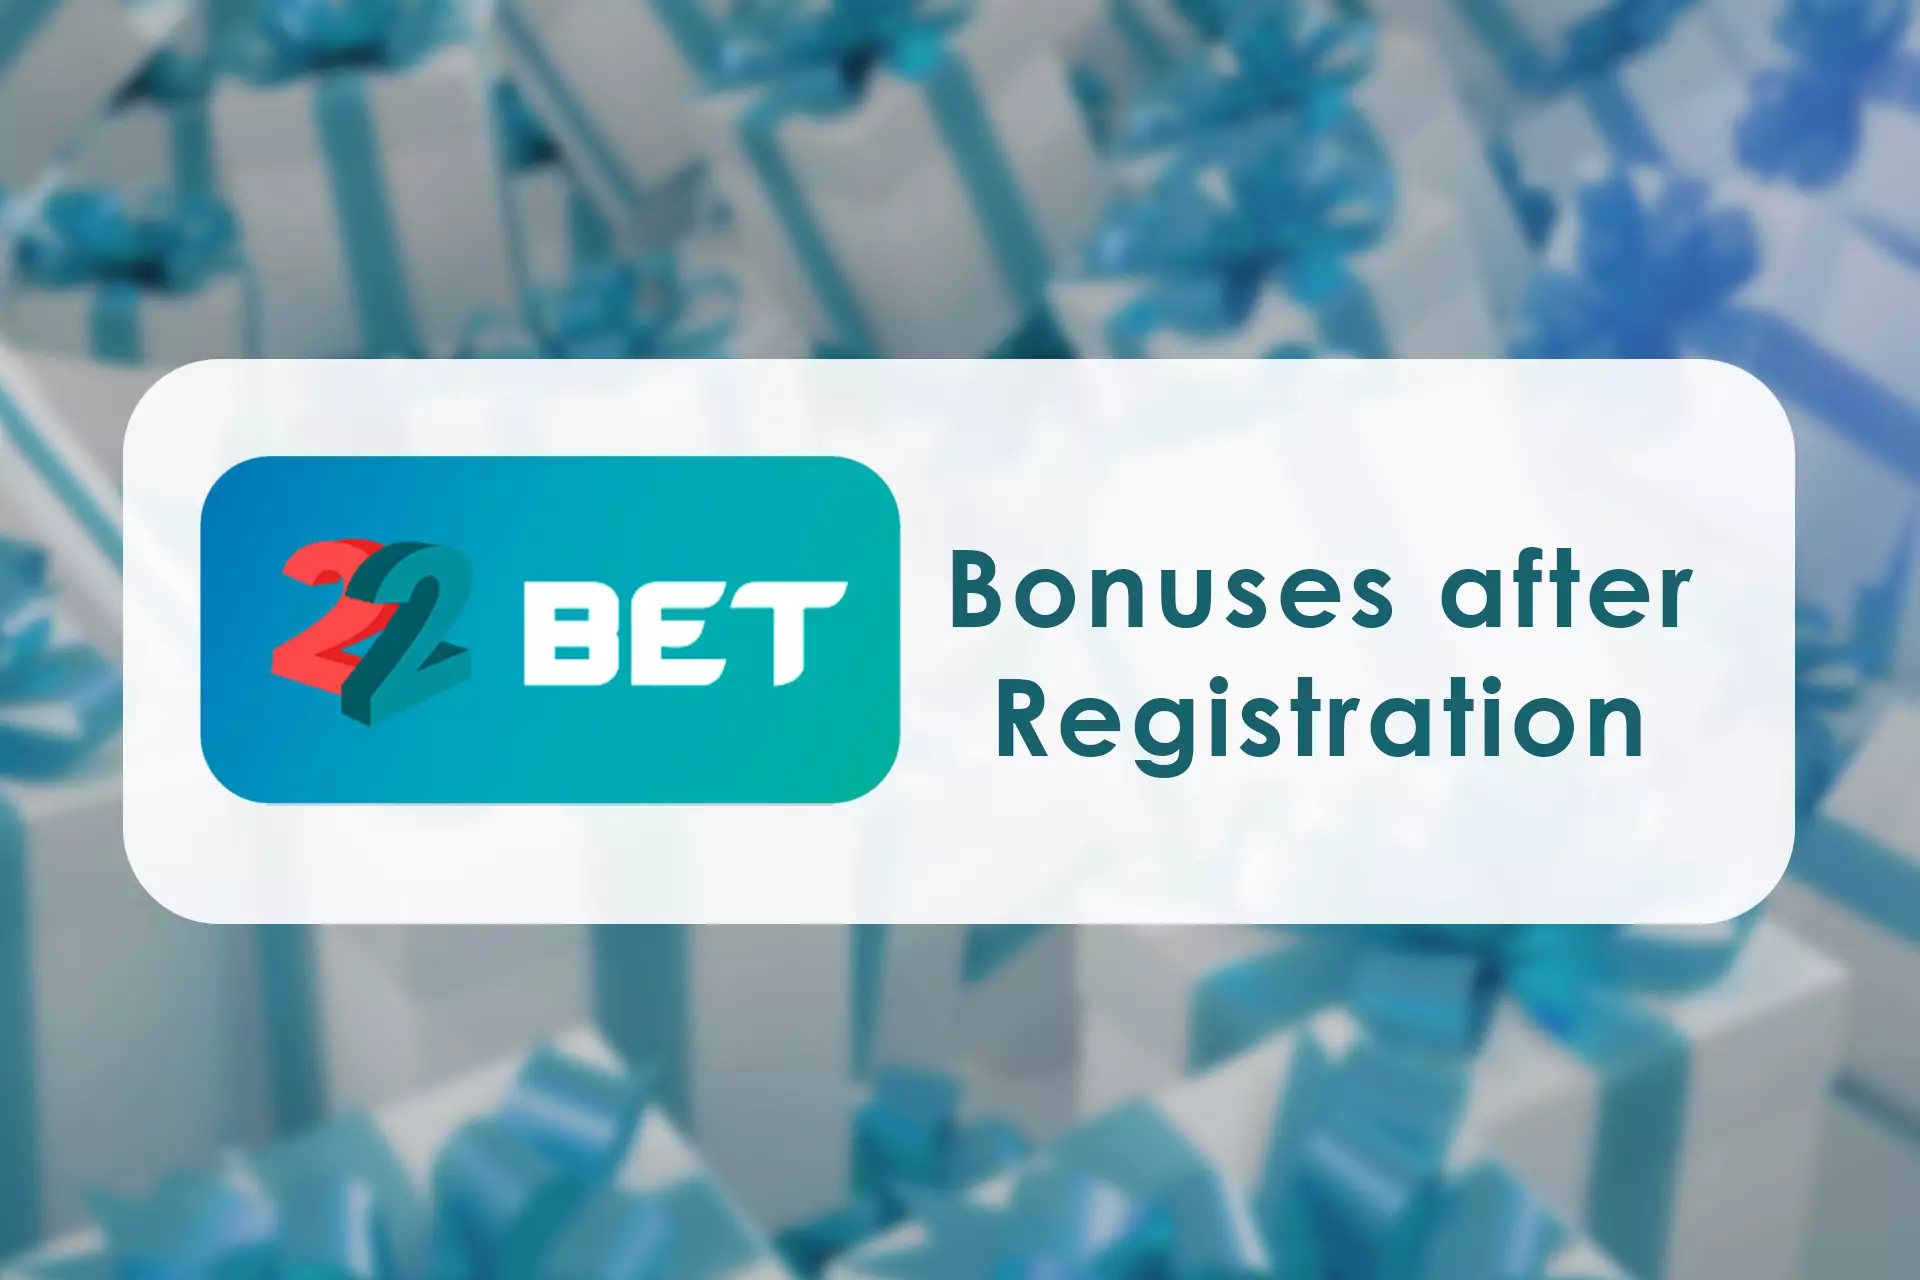 After completing the registration you can receive bonuses from the bookmaker.